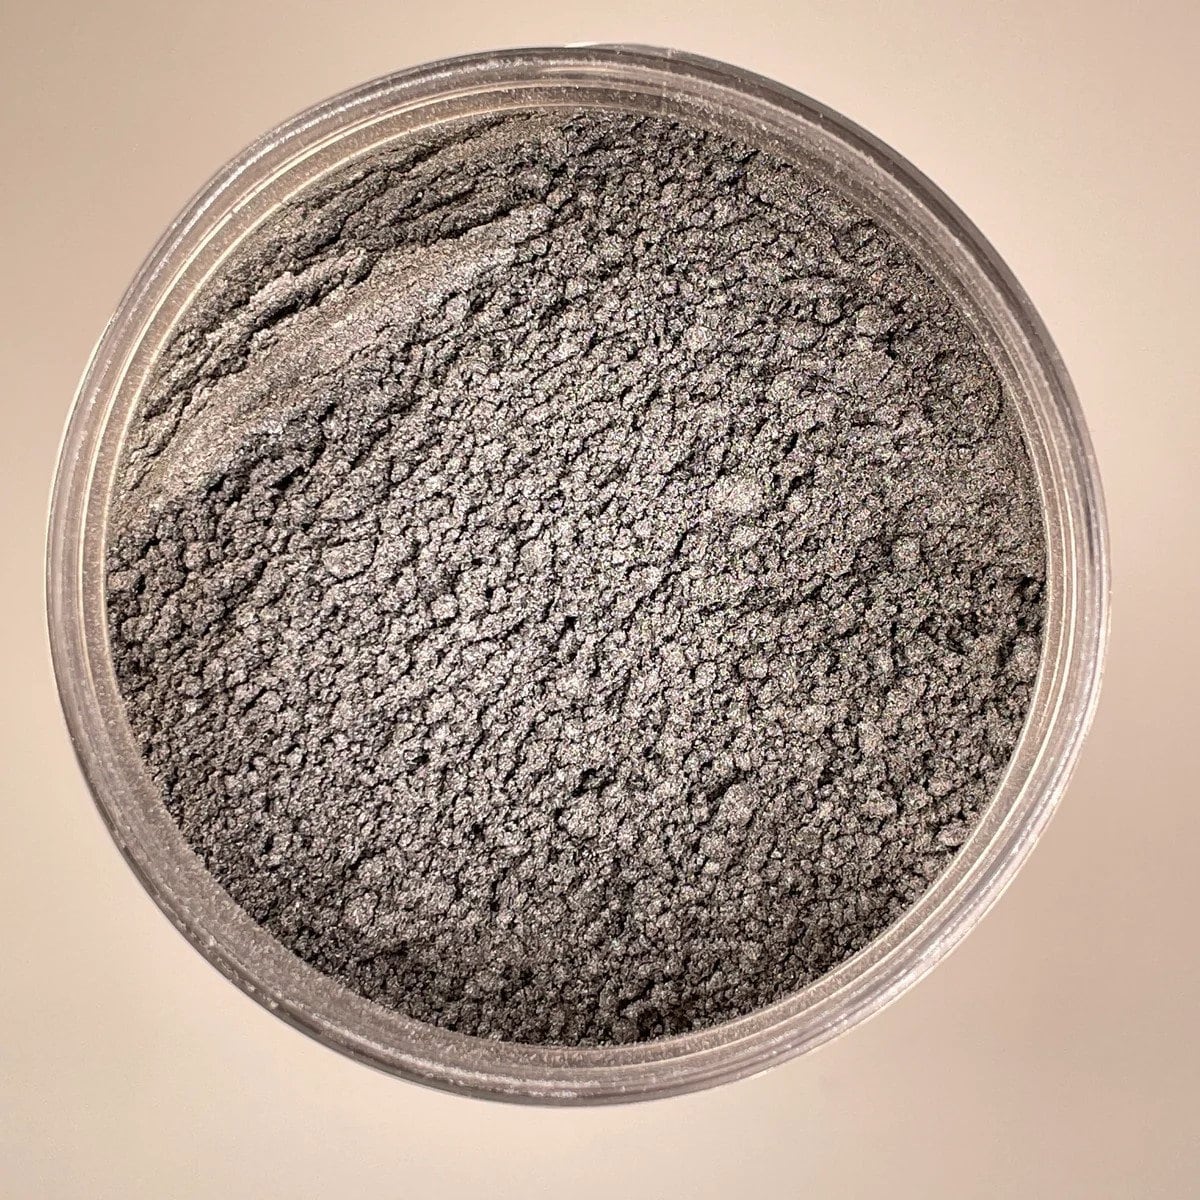 Mica Powder - Rich and Lustrous Colours - Ideal For Epoxy Resin, Candles, Makeup, Nail Art, Soap and More - Colour is Gun Metal Grey - TMResinsupplies